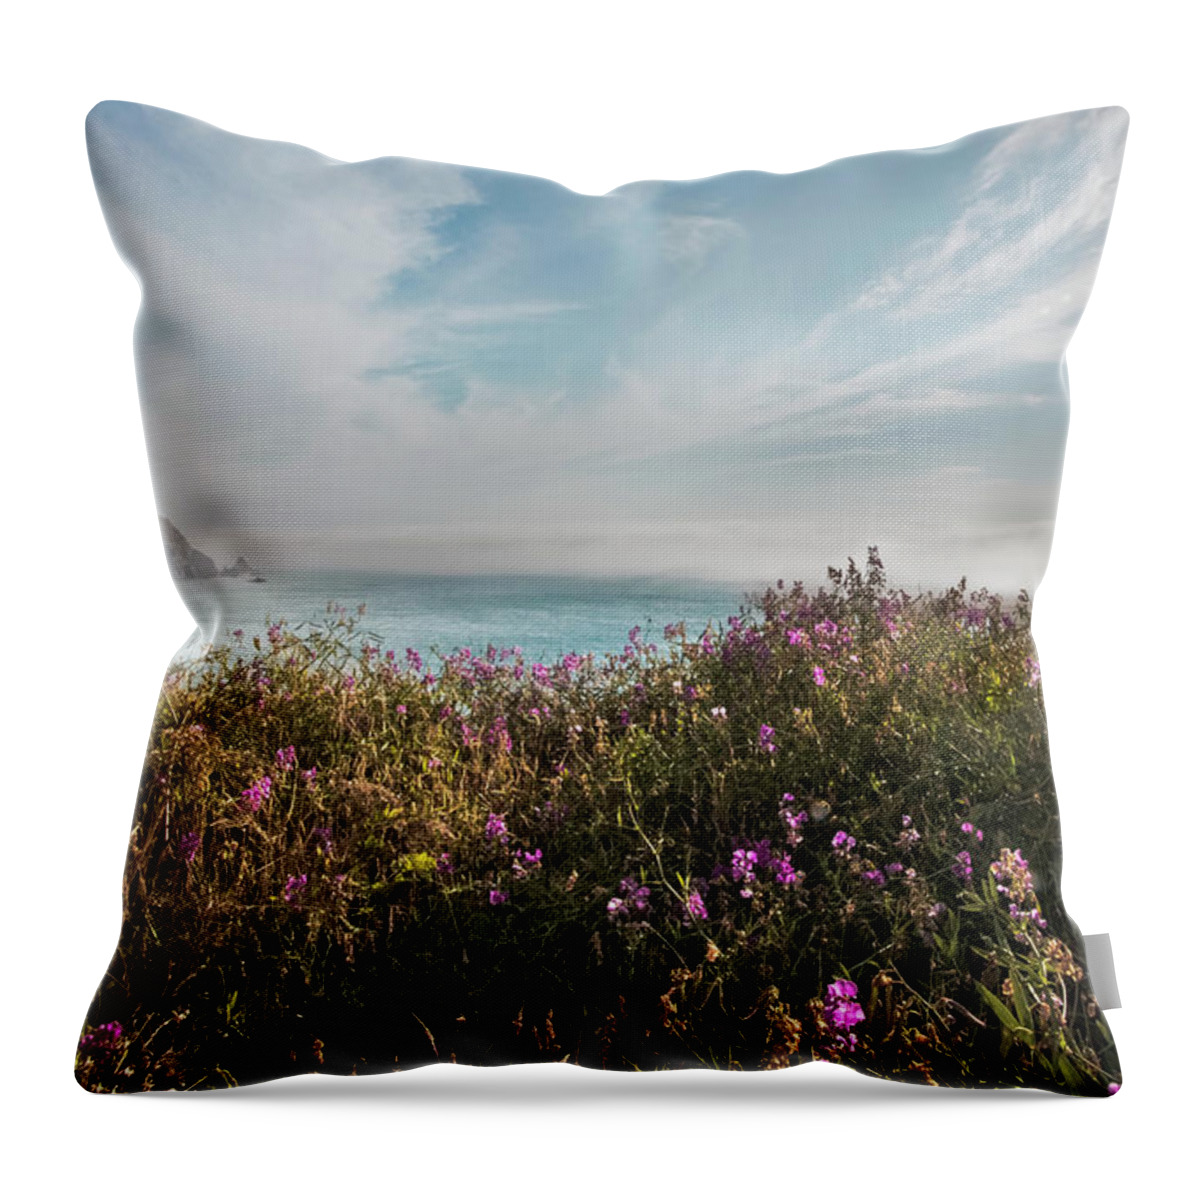 Clouds Throw Pillow featuring the photograph The Pacific Coastline Wildflowers in Soft Hues by Debra and Dave Vanderlaan